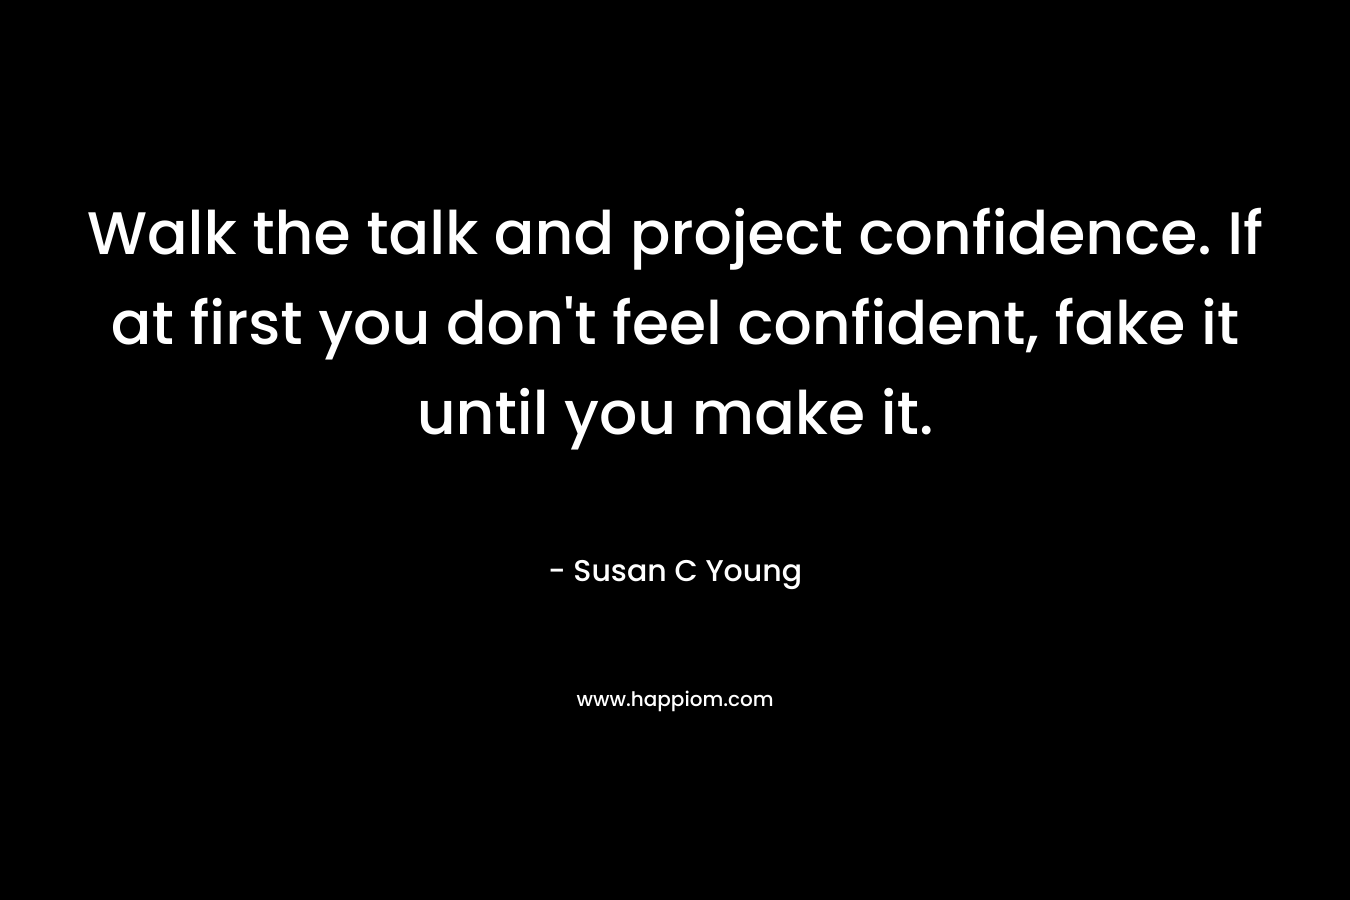 Walk the talk and project confidence. If at first you don’t feel confident, fake it until you make it. – Susan C Young